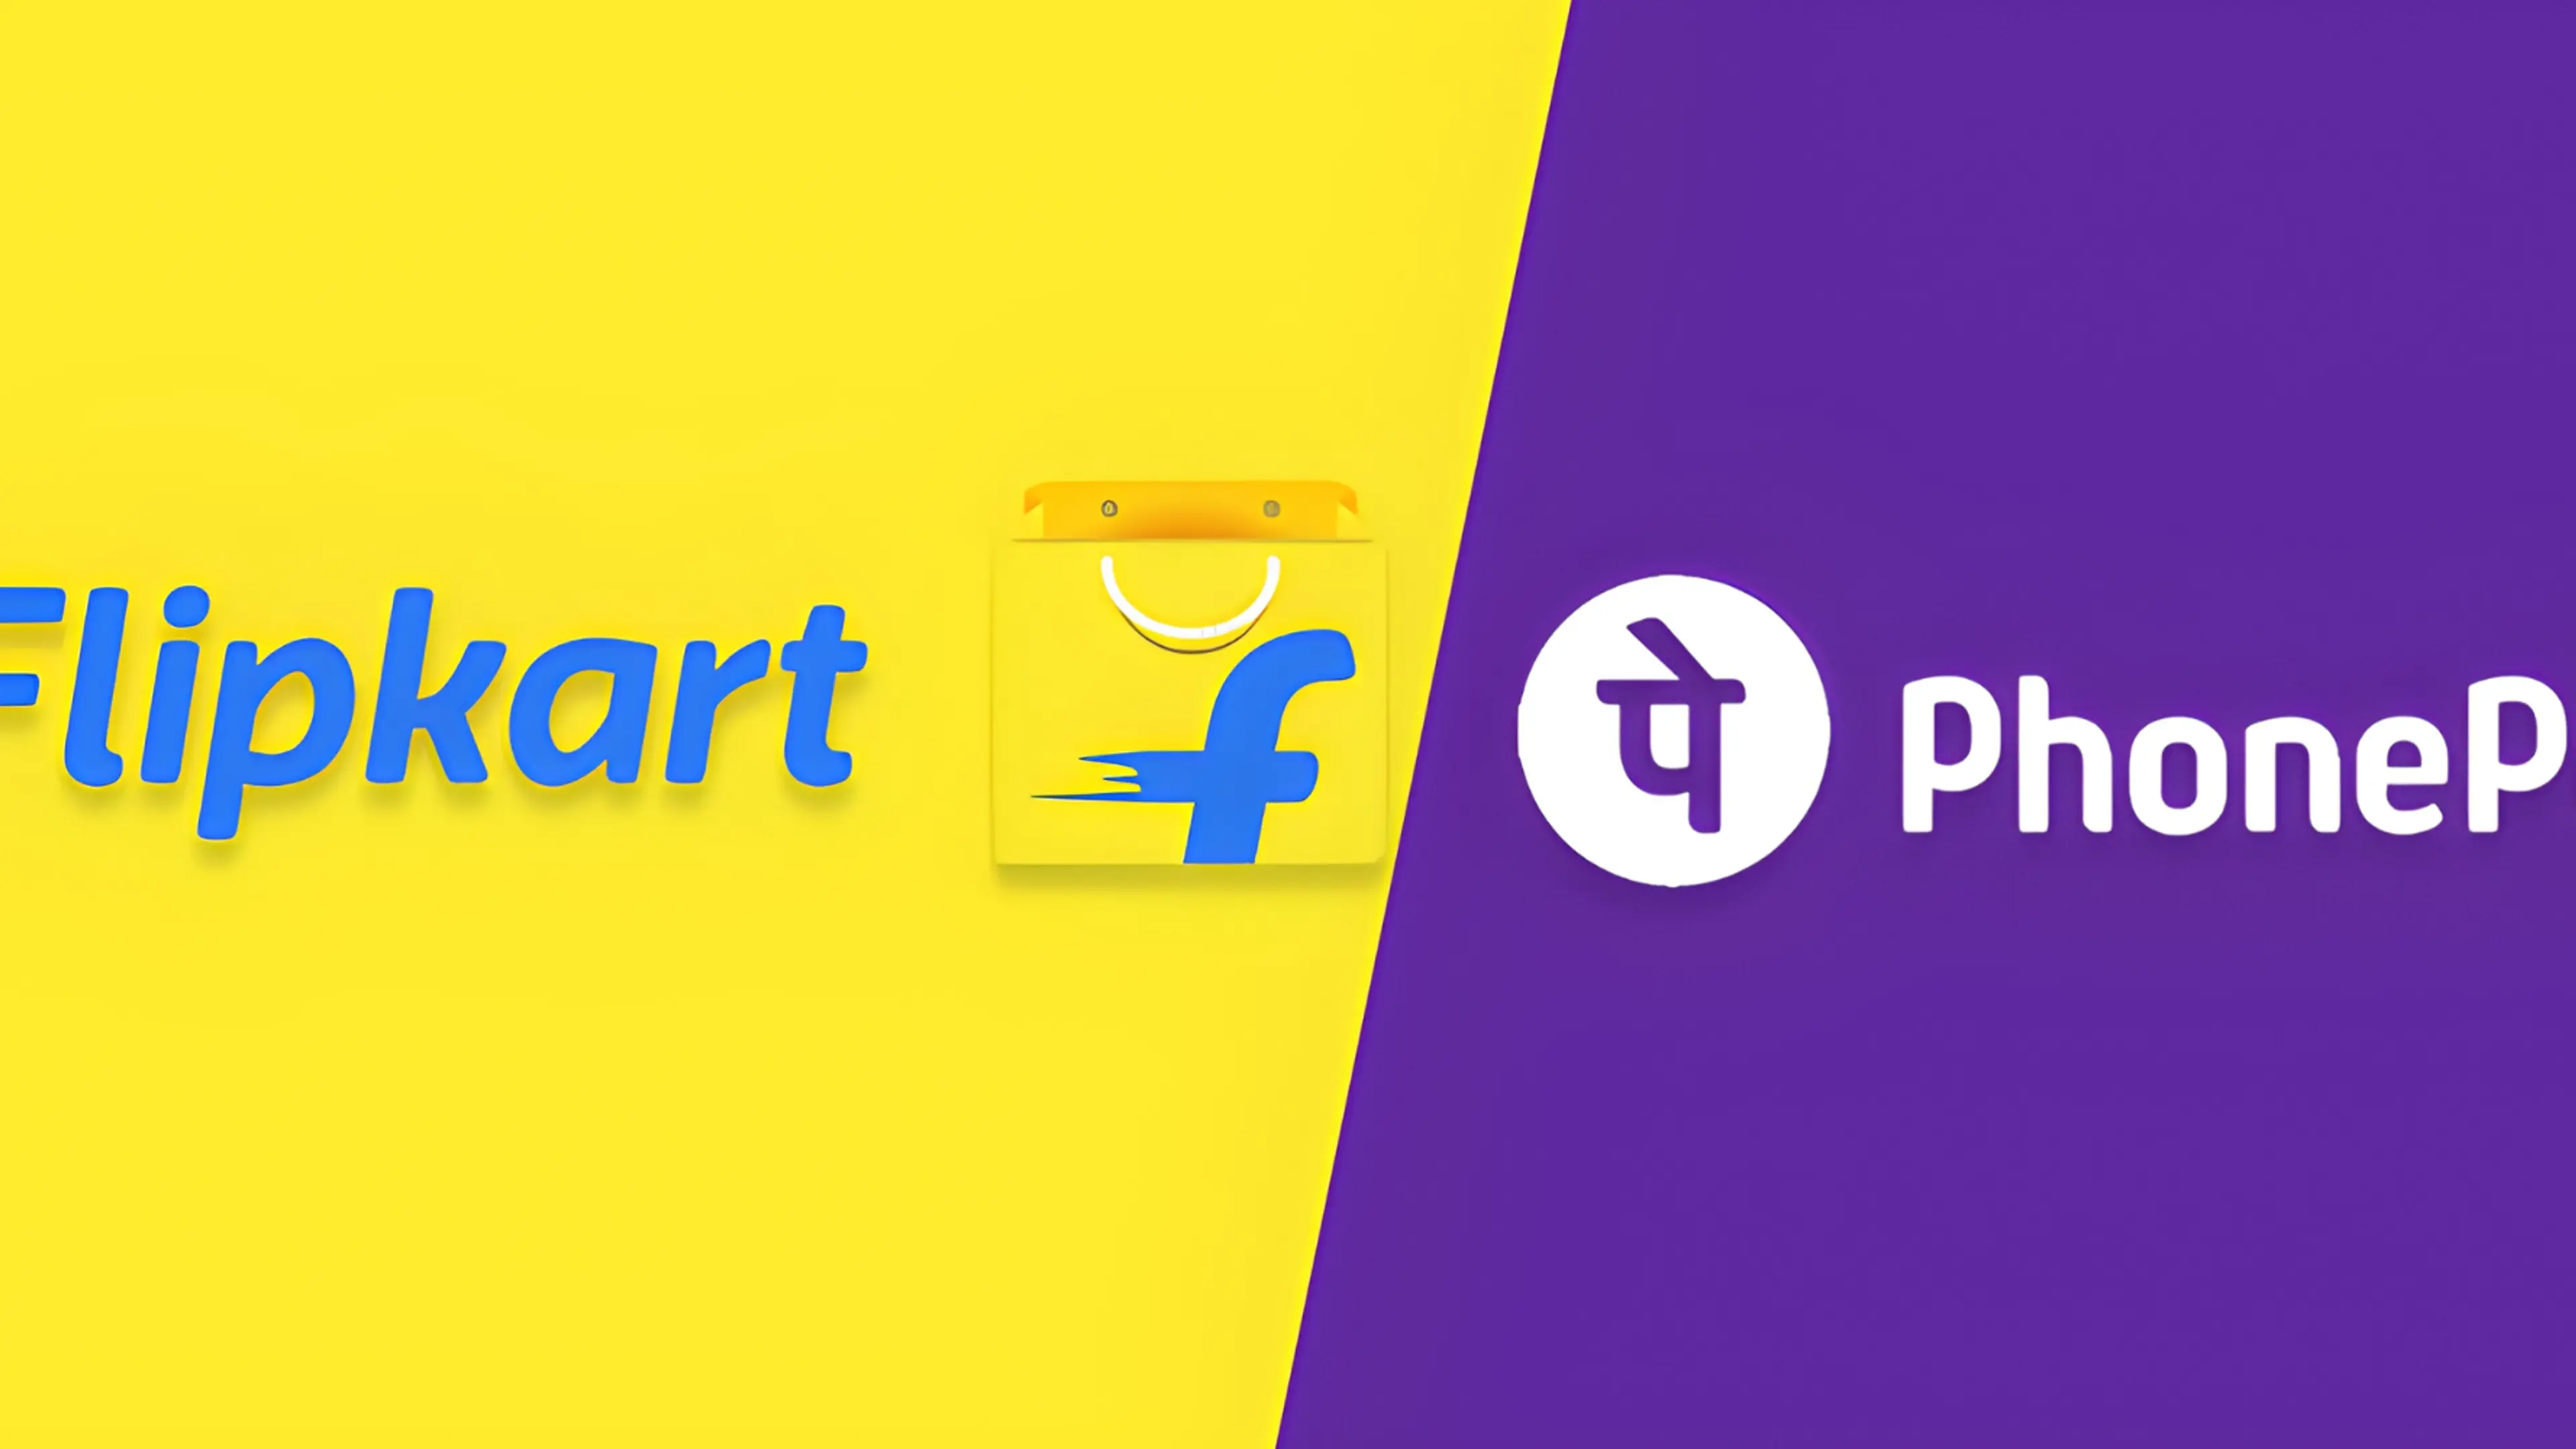 Current and former employees at Flipkart collect $700M from one-time ESOP payout